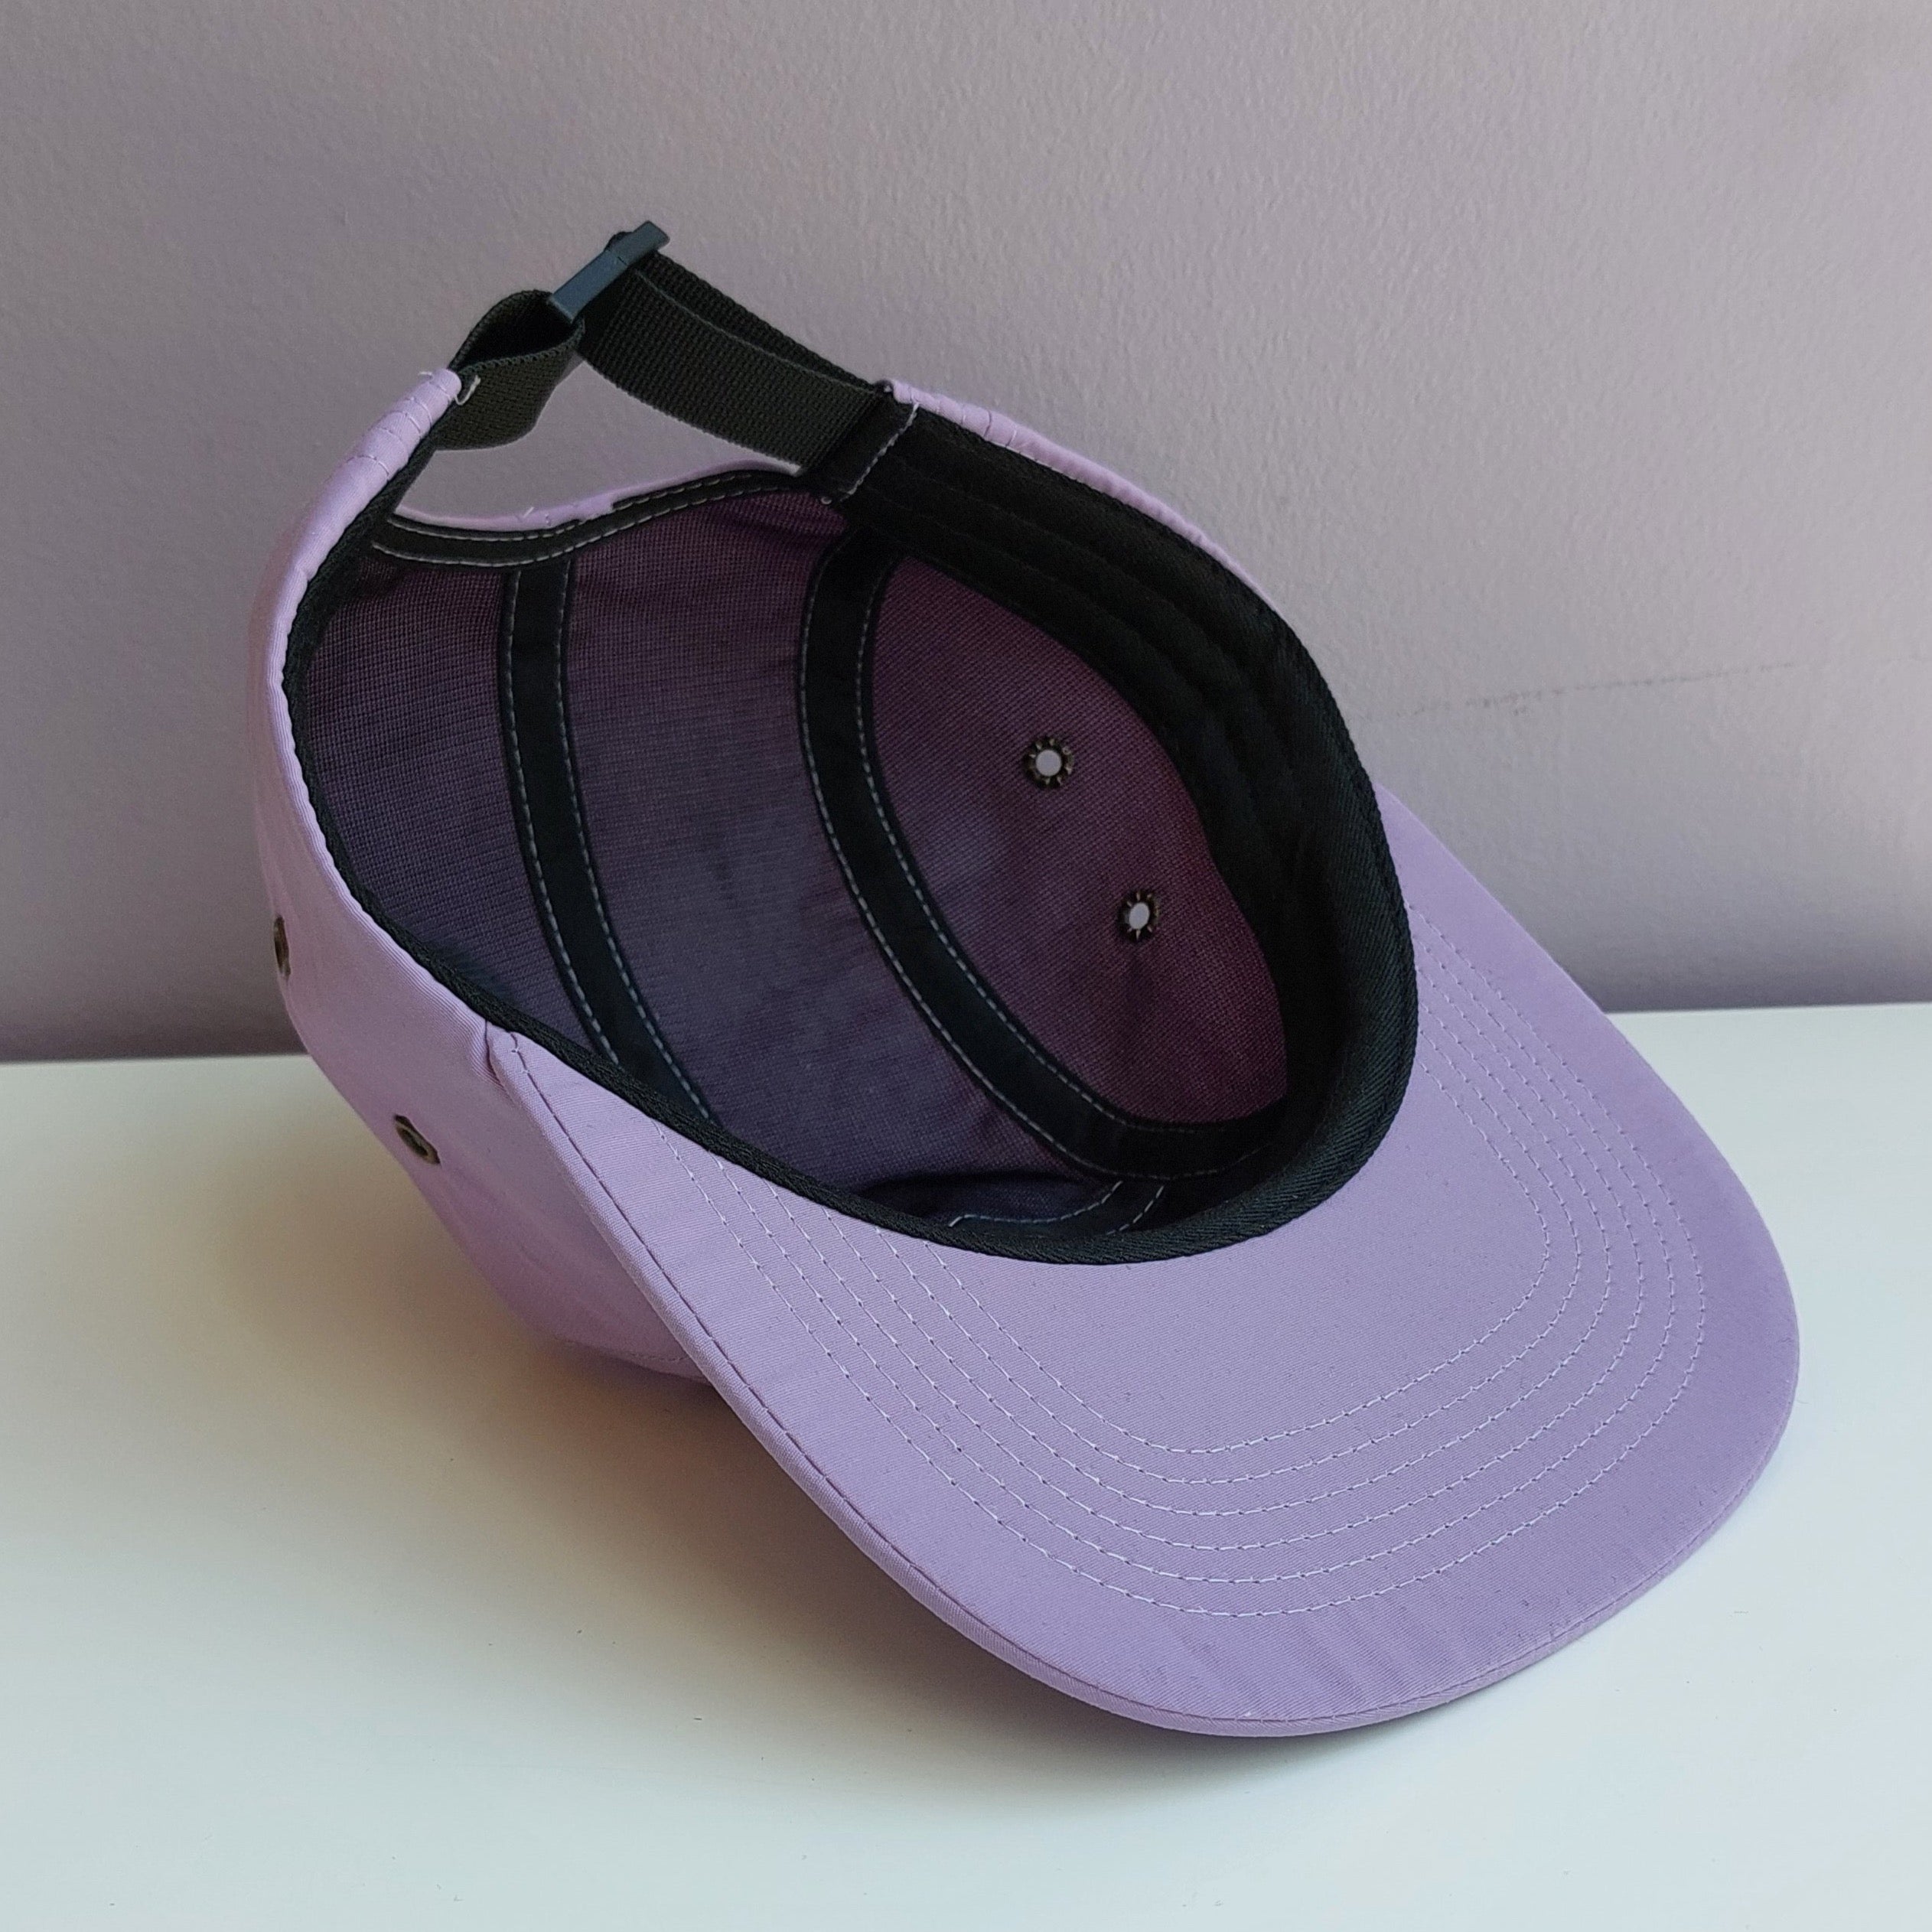 A light purple 5 panel cap with black mesh interior is upside down & turned at a 45 degree angle sitting on a white surface with a light purple background.